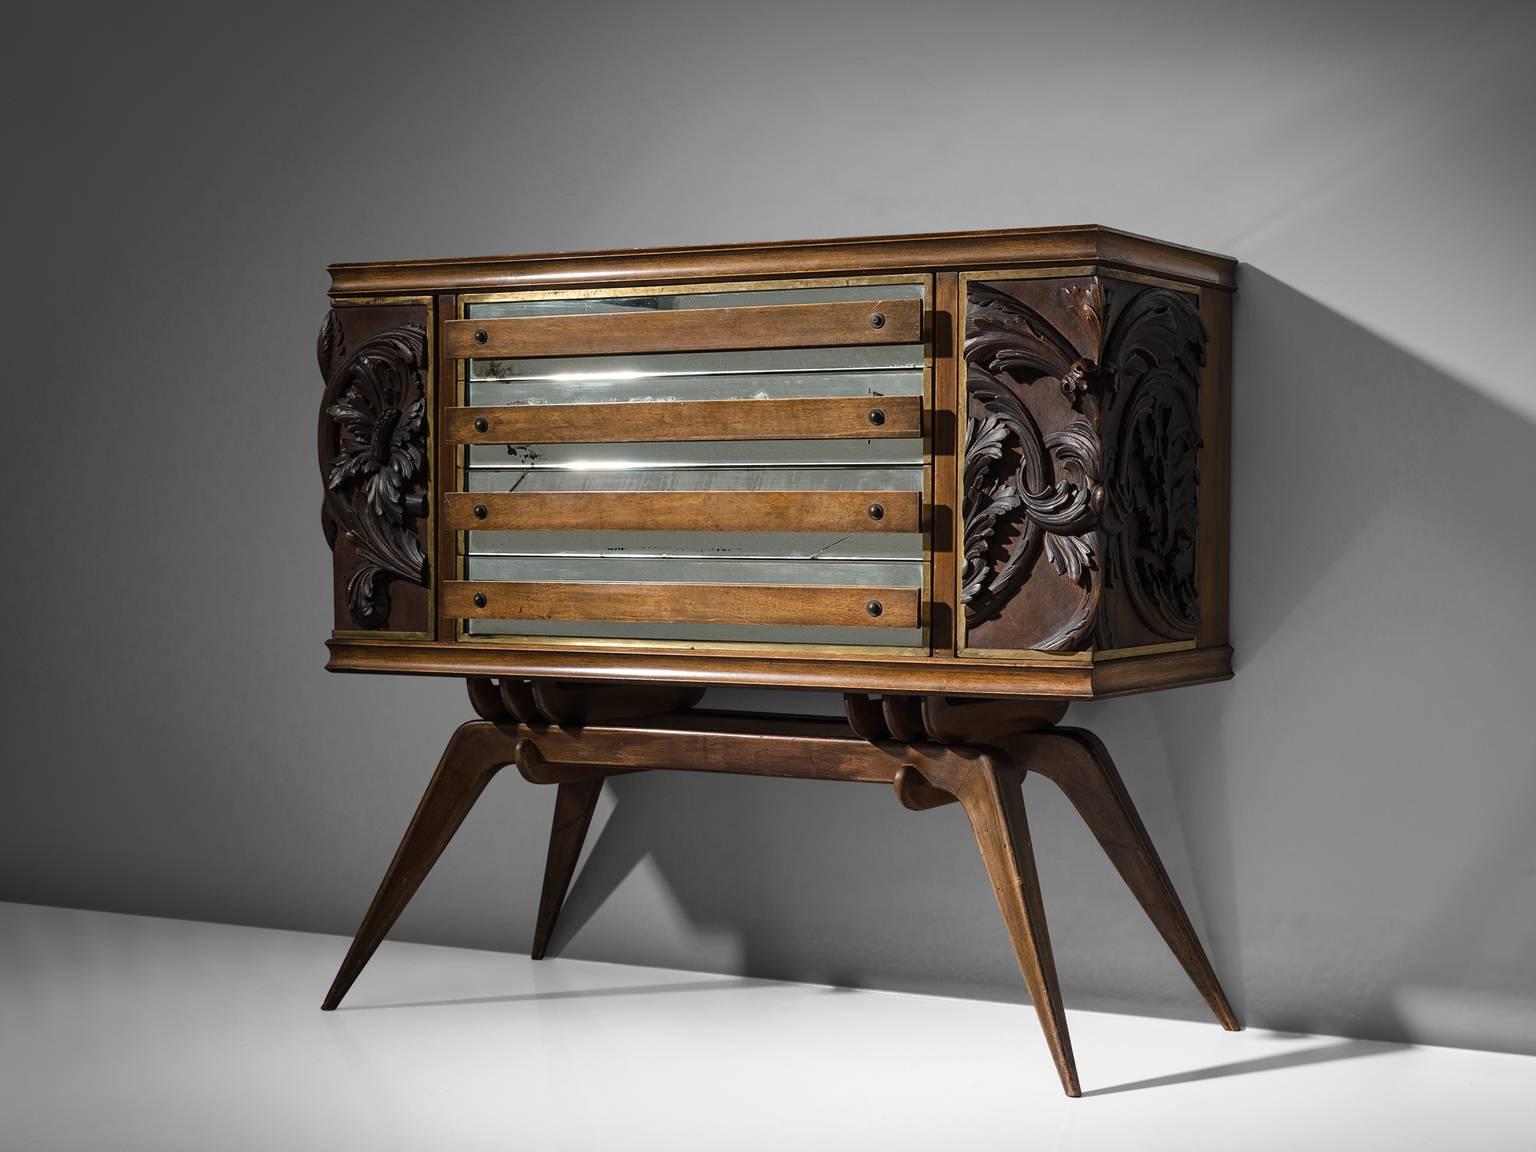 Sideboard, oak. marble, mirror, Italy, 1940s.

The two outer door panels of this cabinet show a very interesting carved oak pattern of floral natural wooden elements, which give this sideboard an expressive touch.
Behind the carvings storage